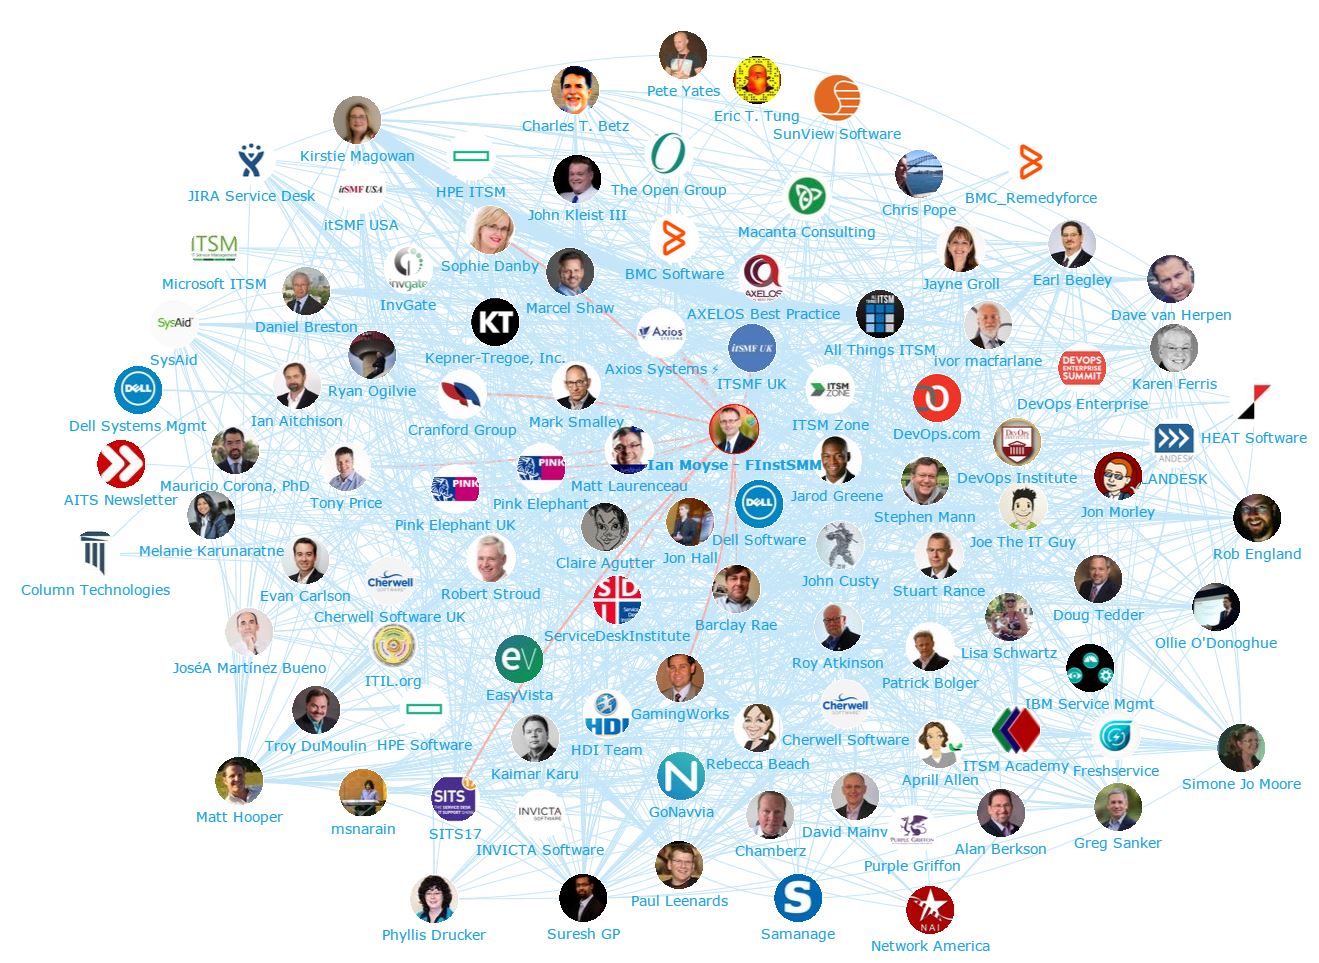 Onalytica - IT Service management TOp 100 Influencers and Brands - Network Map 1 (Ian Moyse)